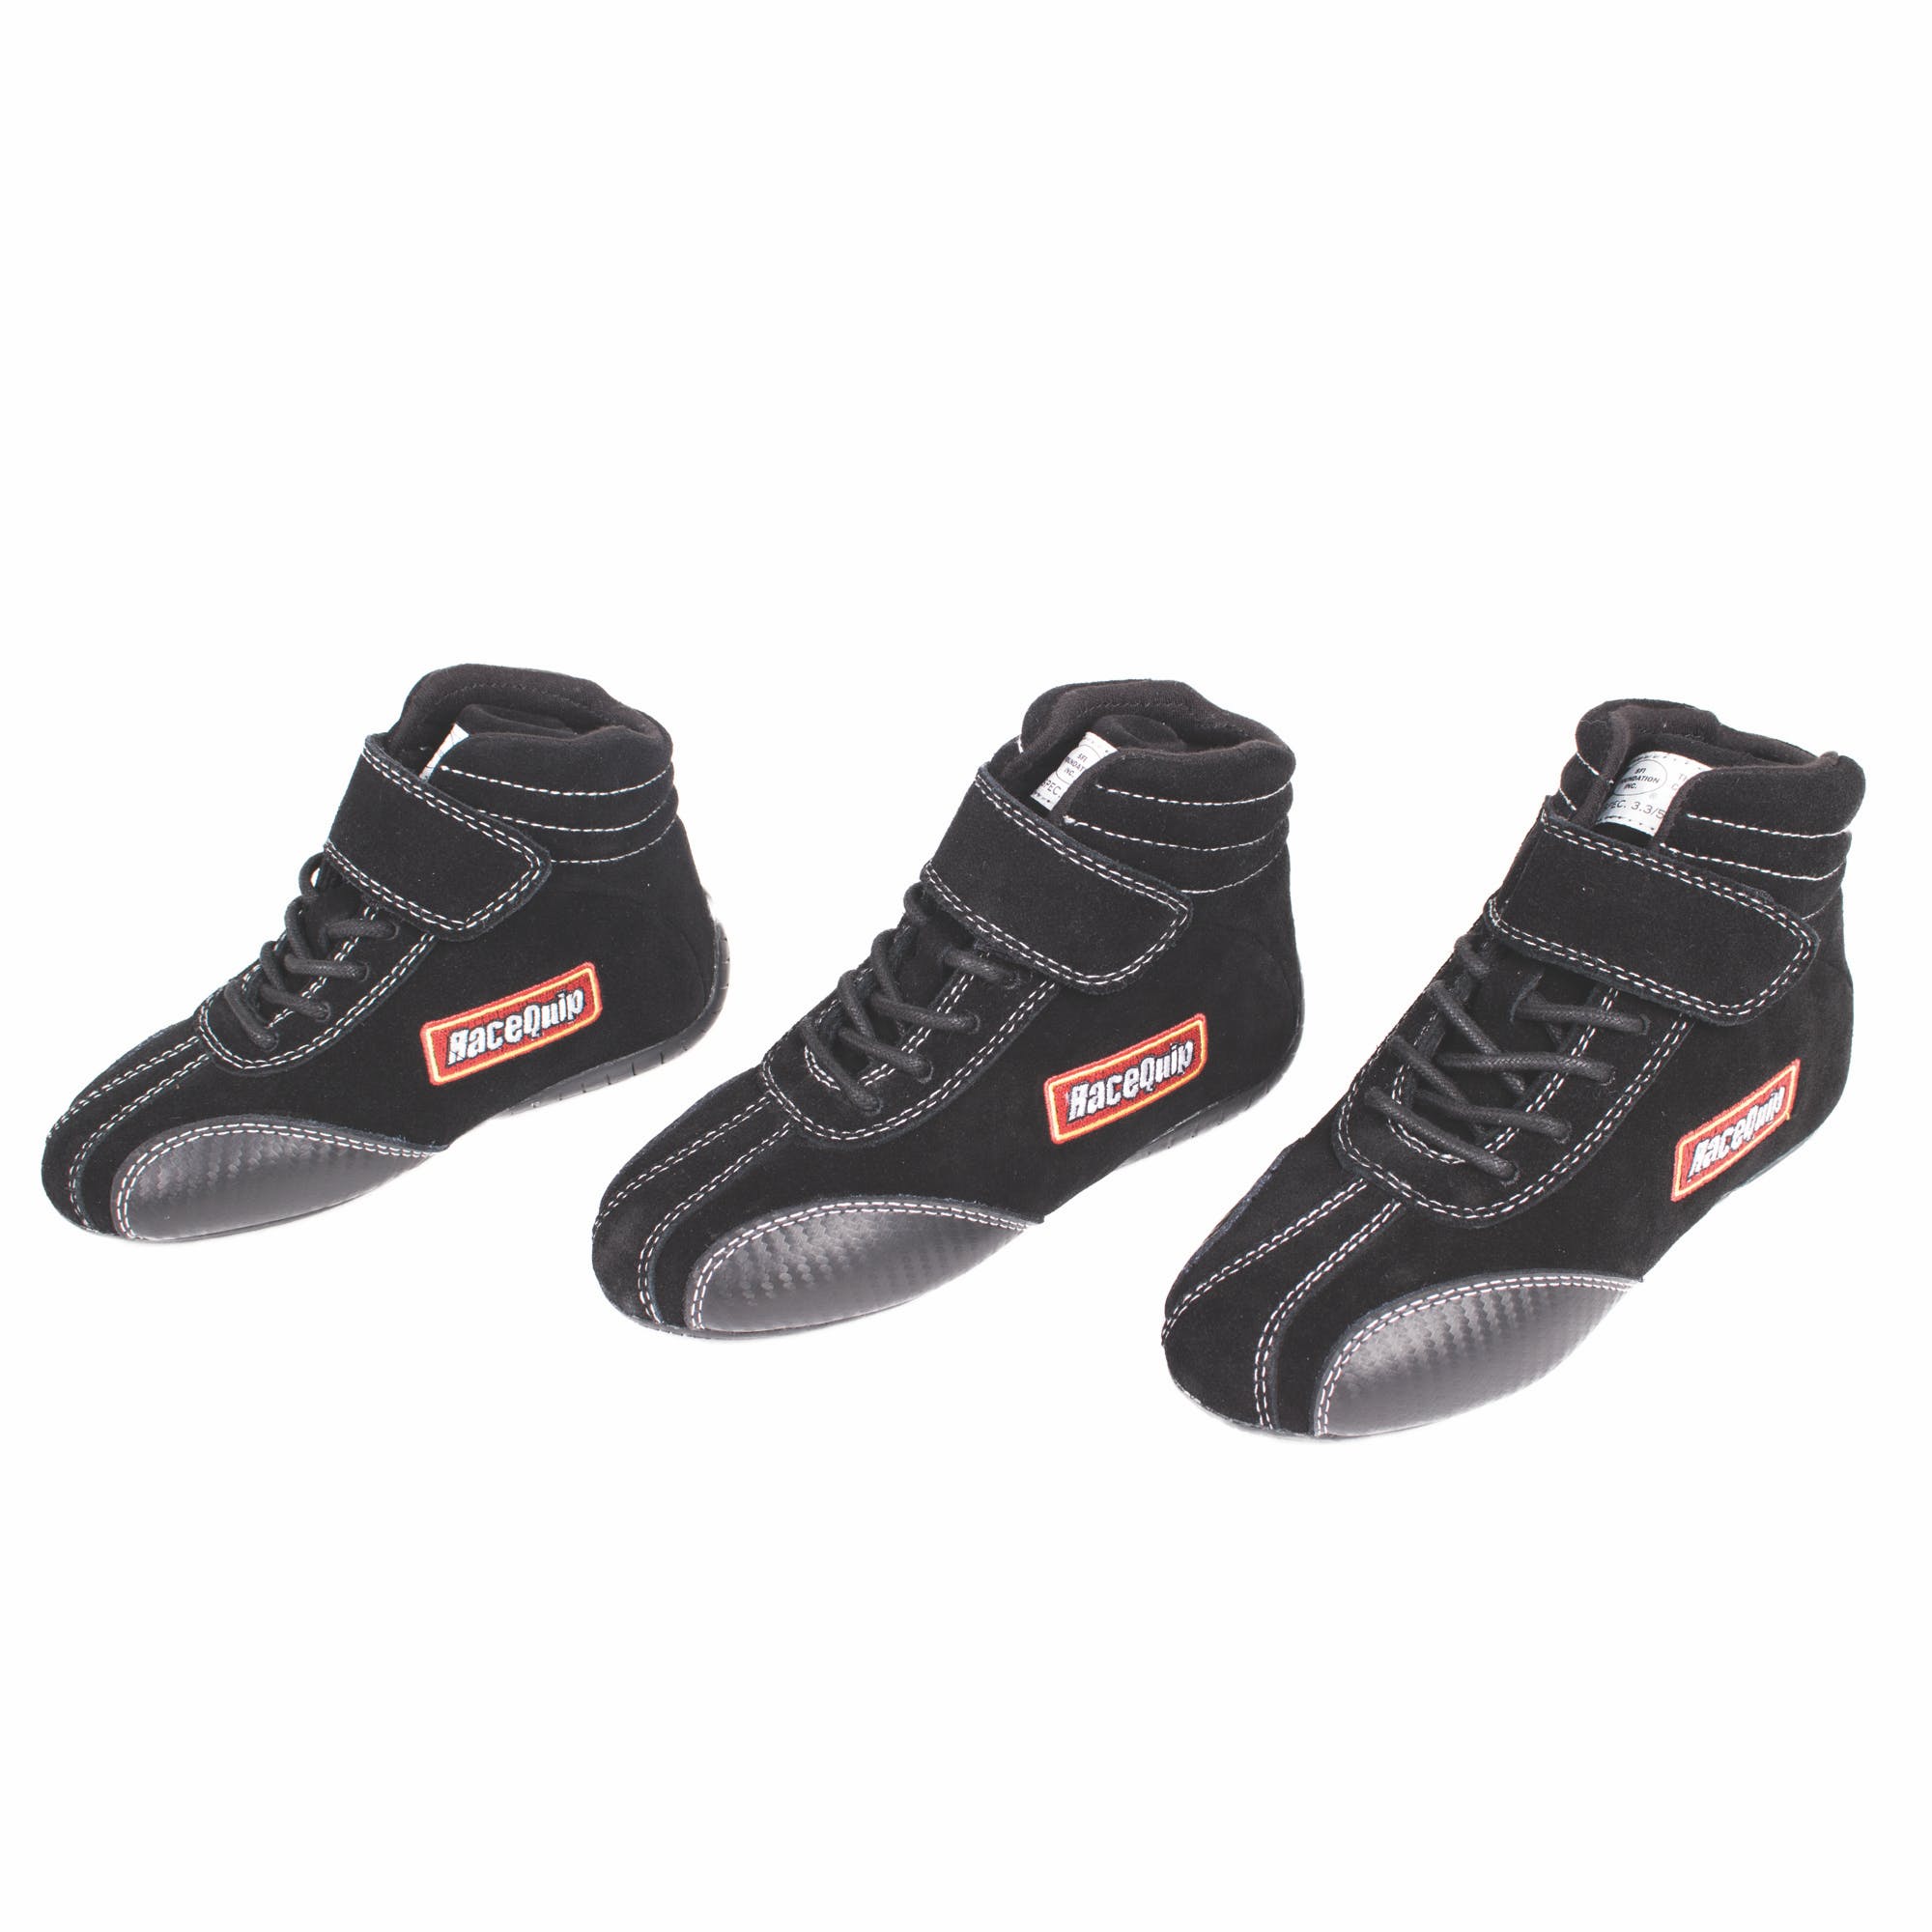 RaceQuip 30400908 Euro Carbon-L Series Race Shoes SFI 3.3/ 5 Certified; Black Youth Size 8